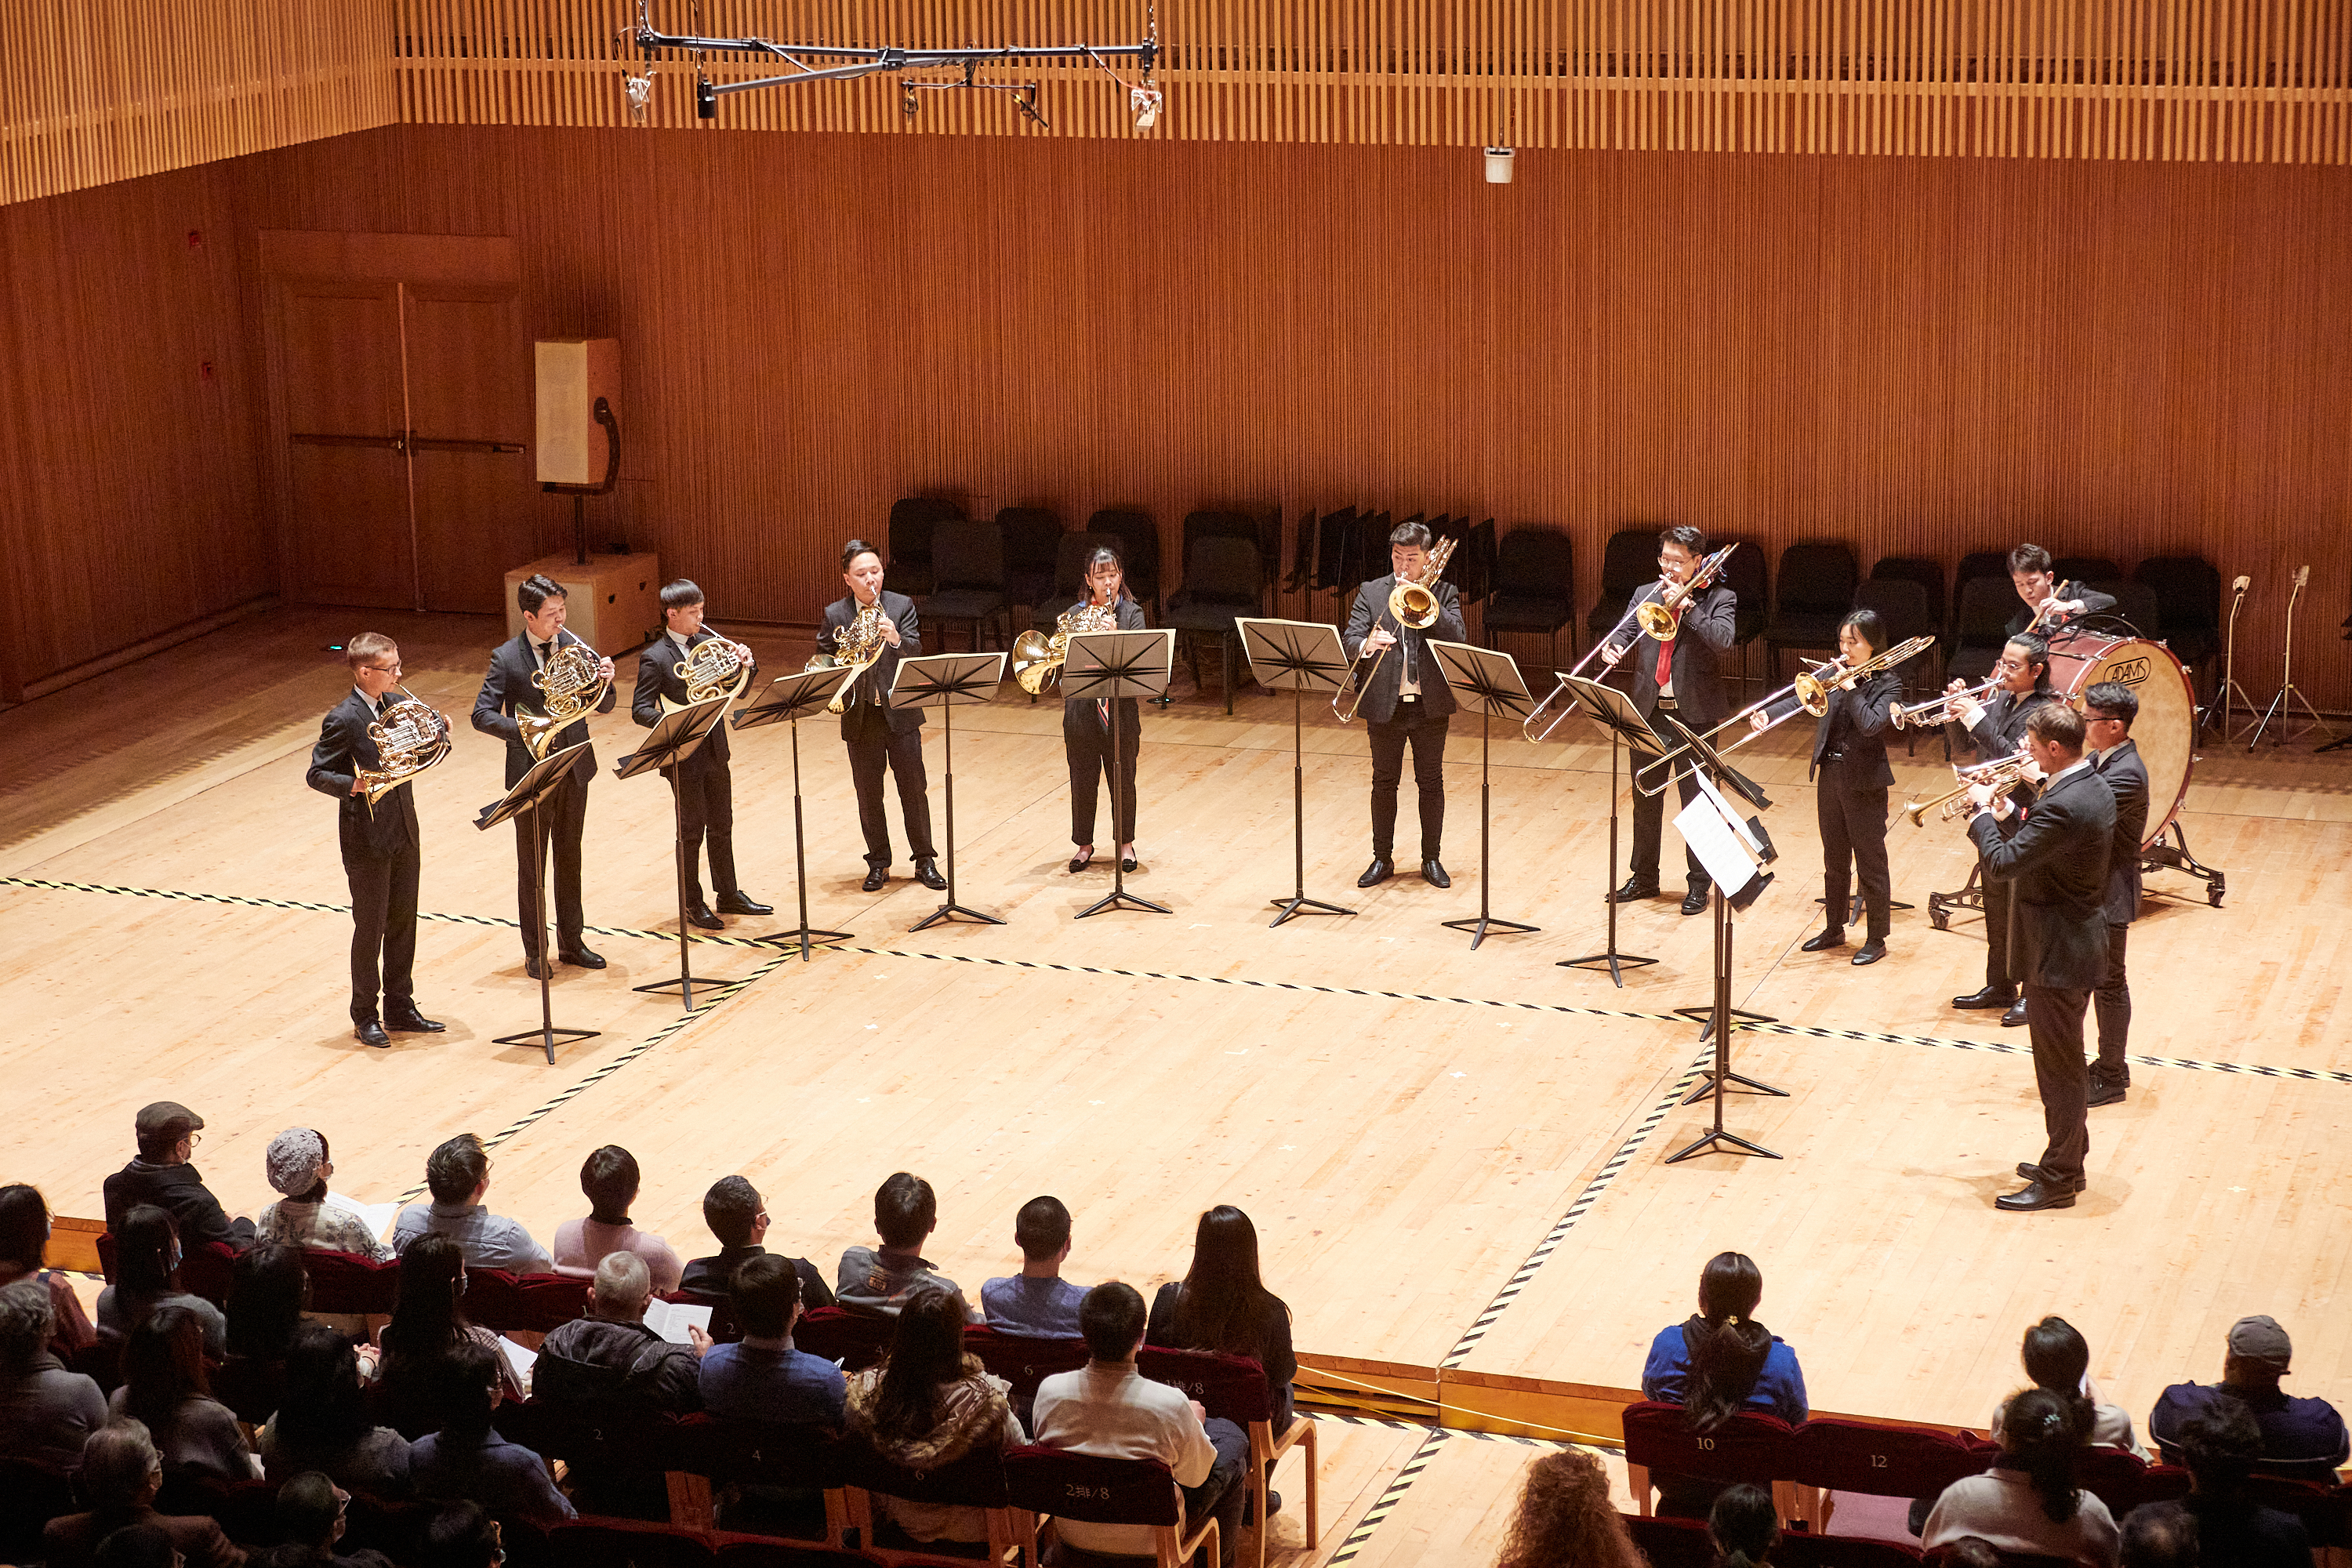 SOA and TJS students performed Mark Zuckerman’s Fanfare for an Uncommon Time. 